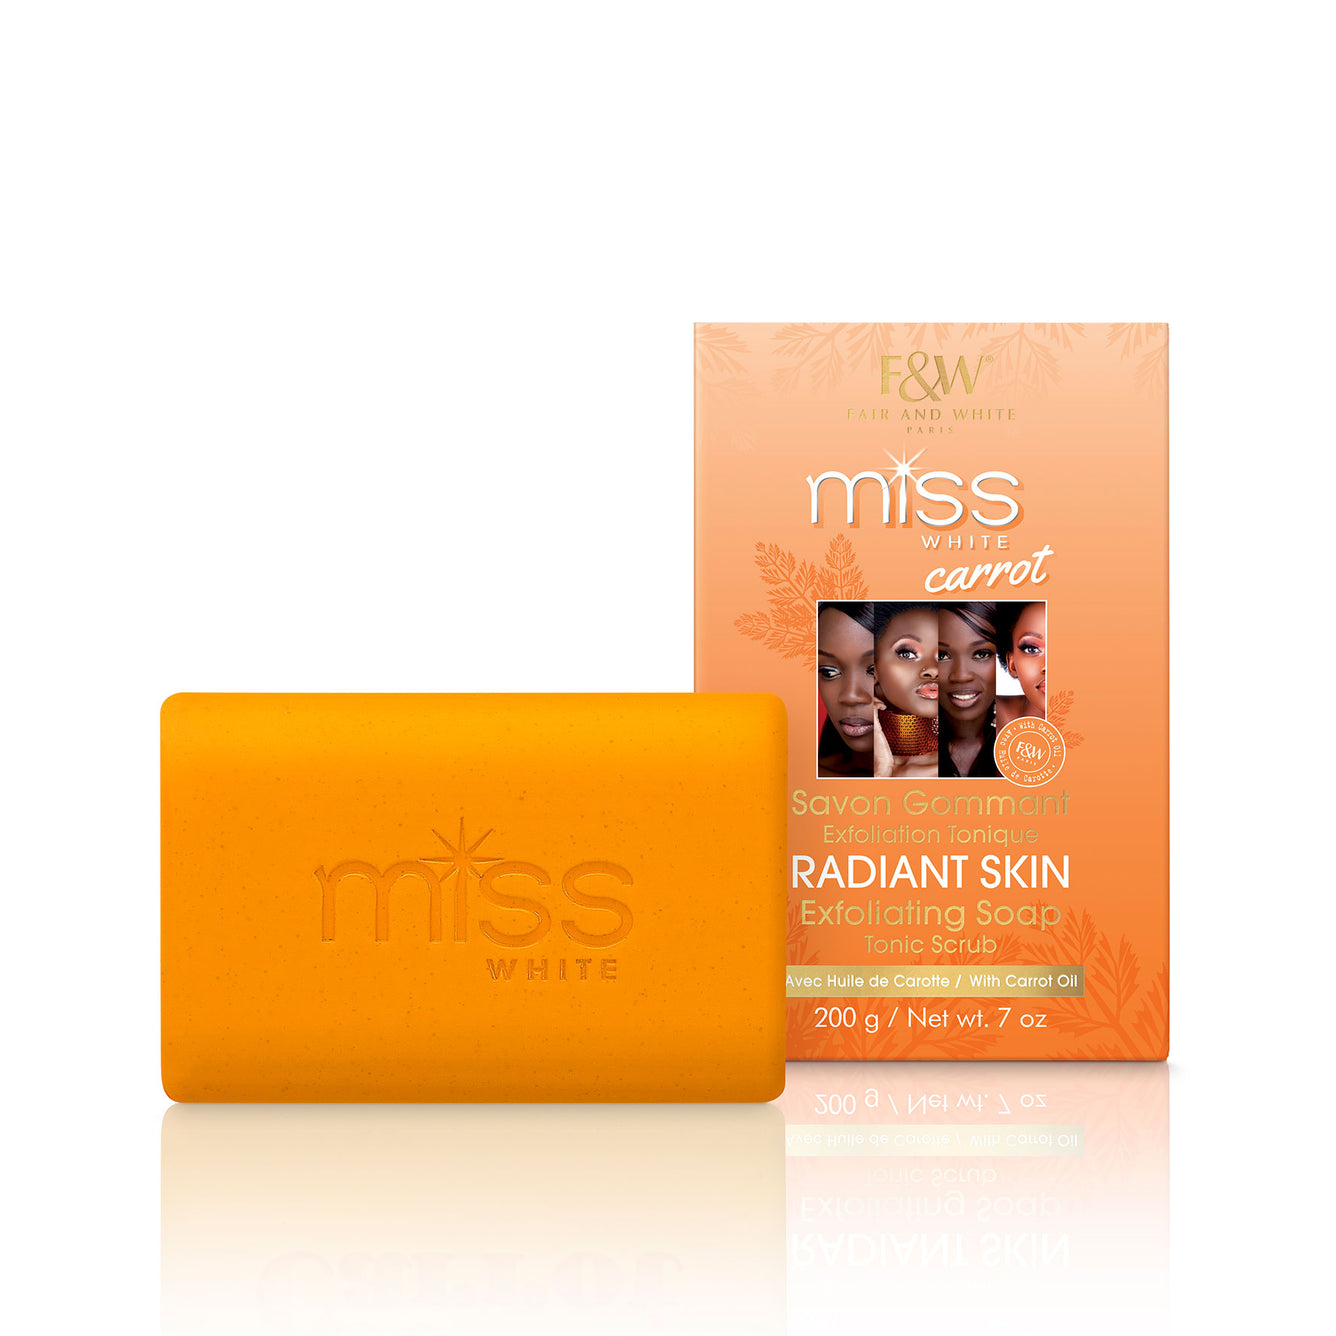 Miss White Carrot Exfoliating Soap Tonic Scrub 200g Mitchell Brands - Mitchell Brands - Skin Lightening, Skin Brightening, Fade Dark Spots, Shea Butter, Hair Growth Products